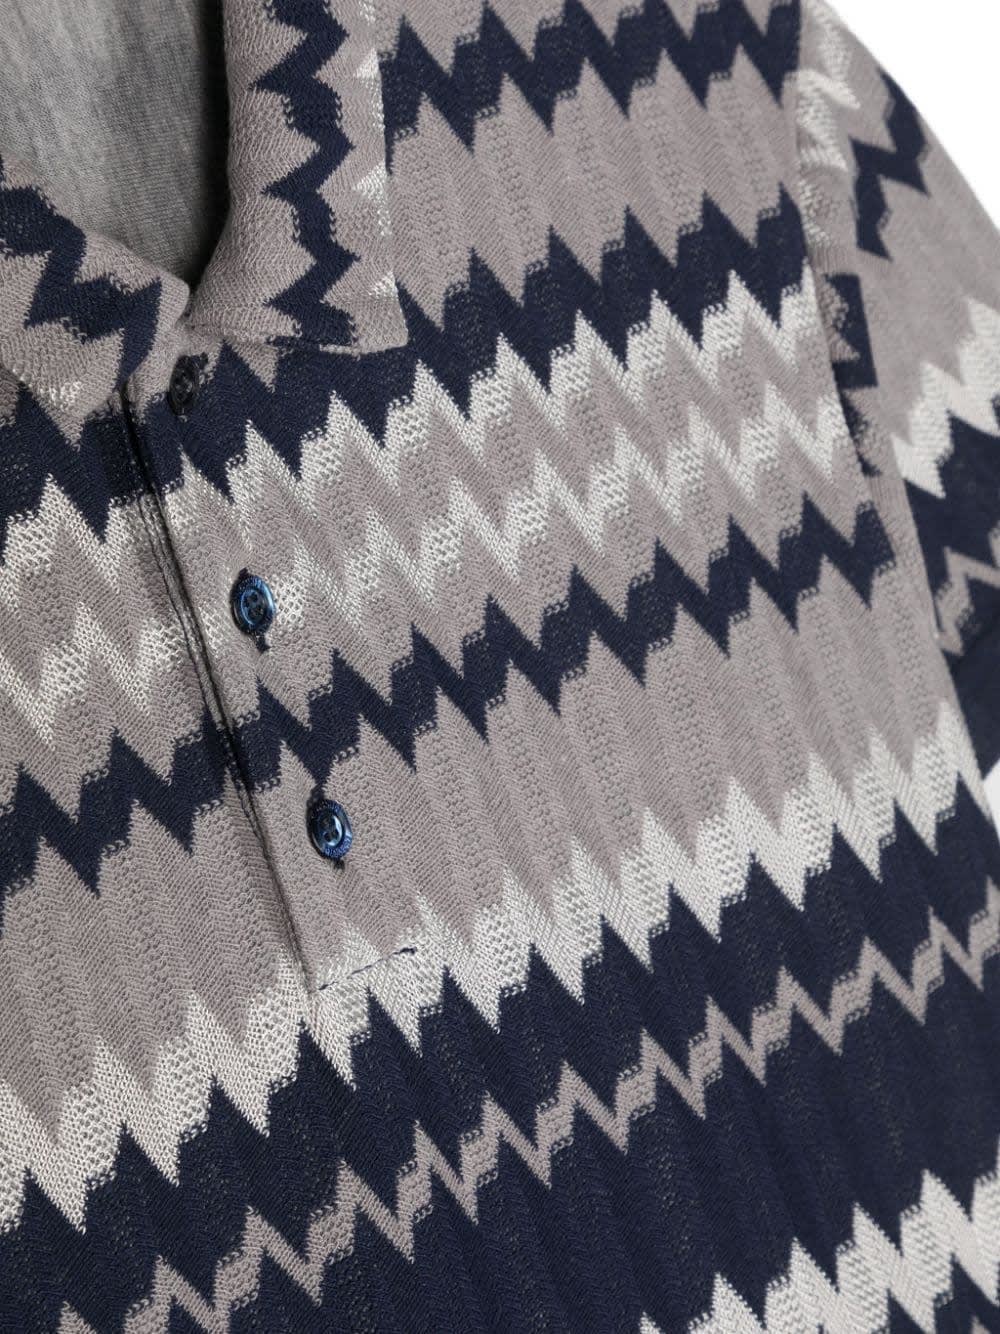 Shop Missoni Blue And Grey All-over Chevron Polo Shirt